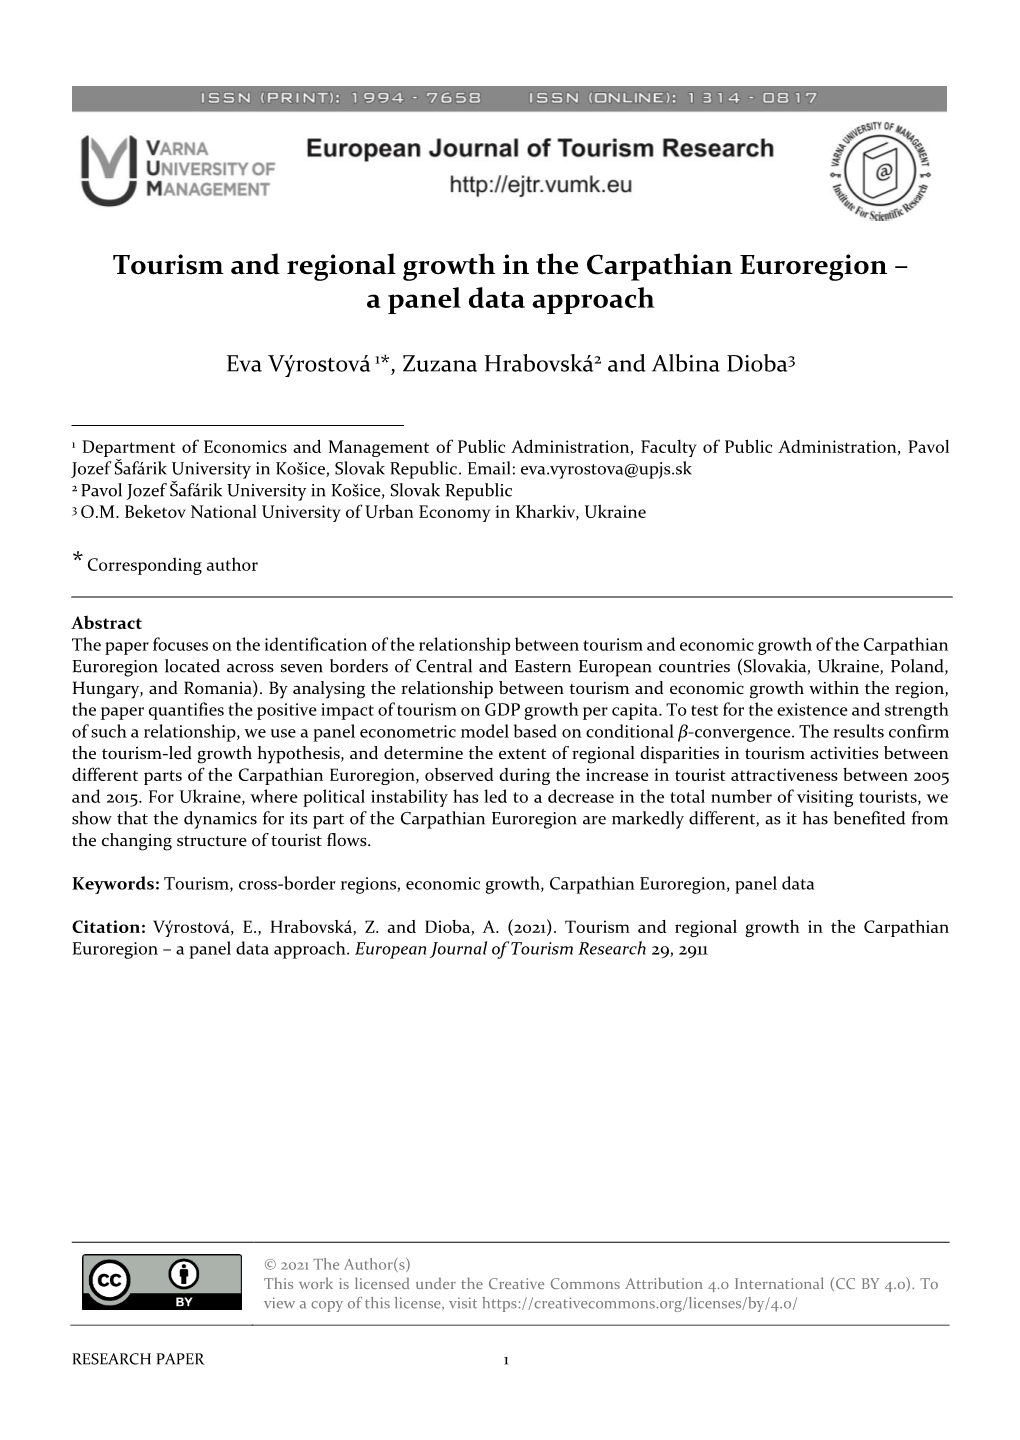 Tourism and Regional Growth in the Carpathian Euroregion – a Panel Data Approach